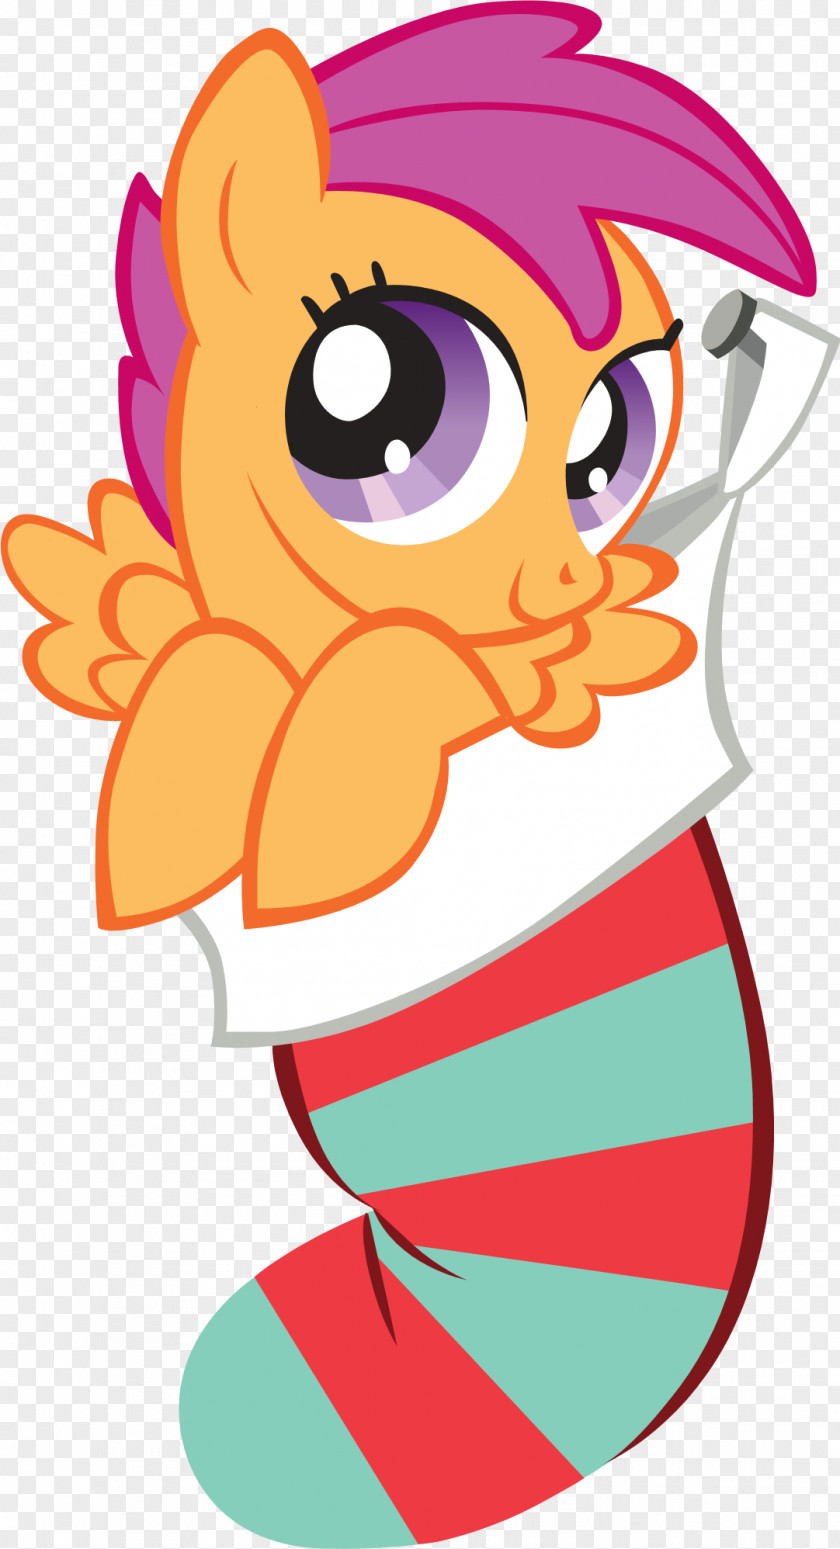 Adorable. Pony Pinkie Pie Scootaloo Derpy Hooves Twilight Sparkle PNG